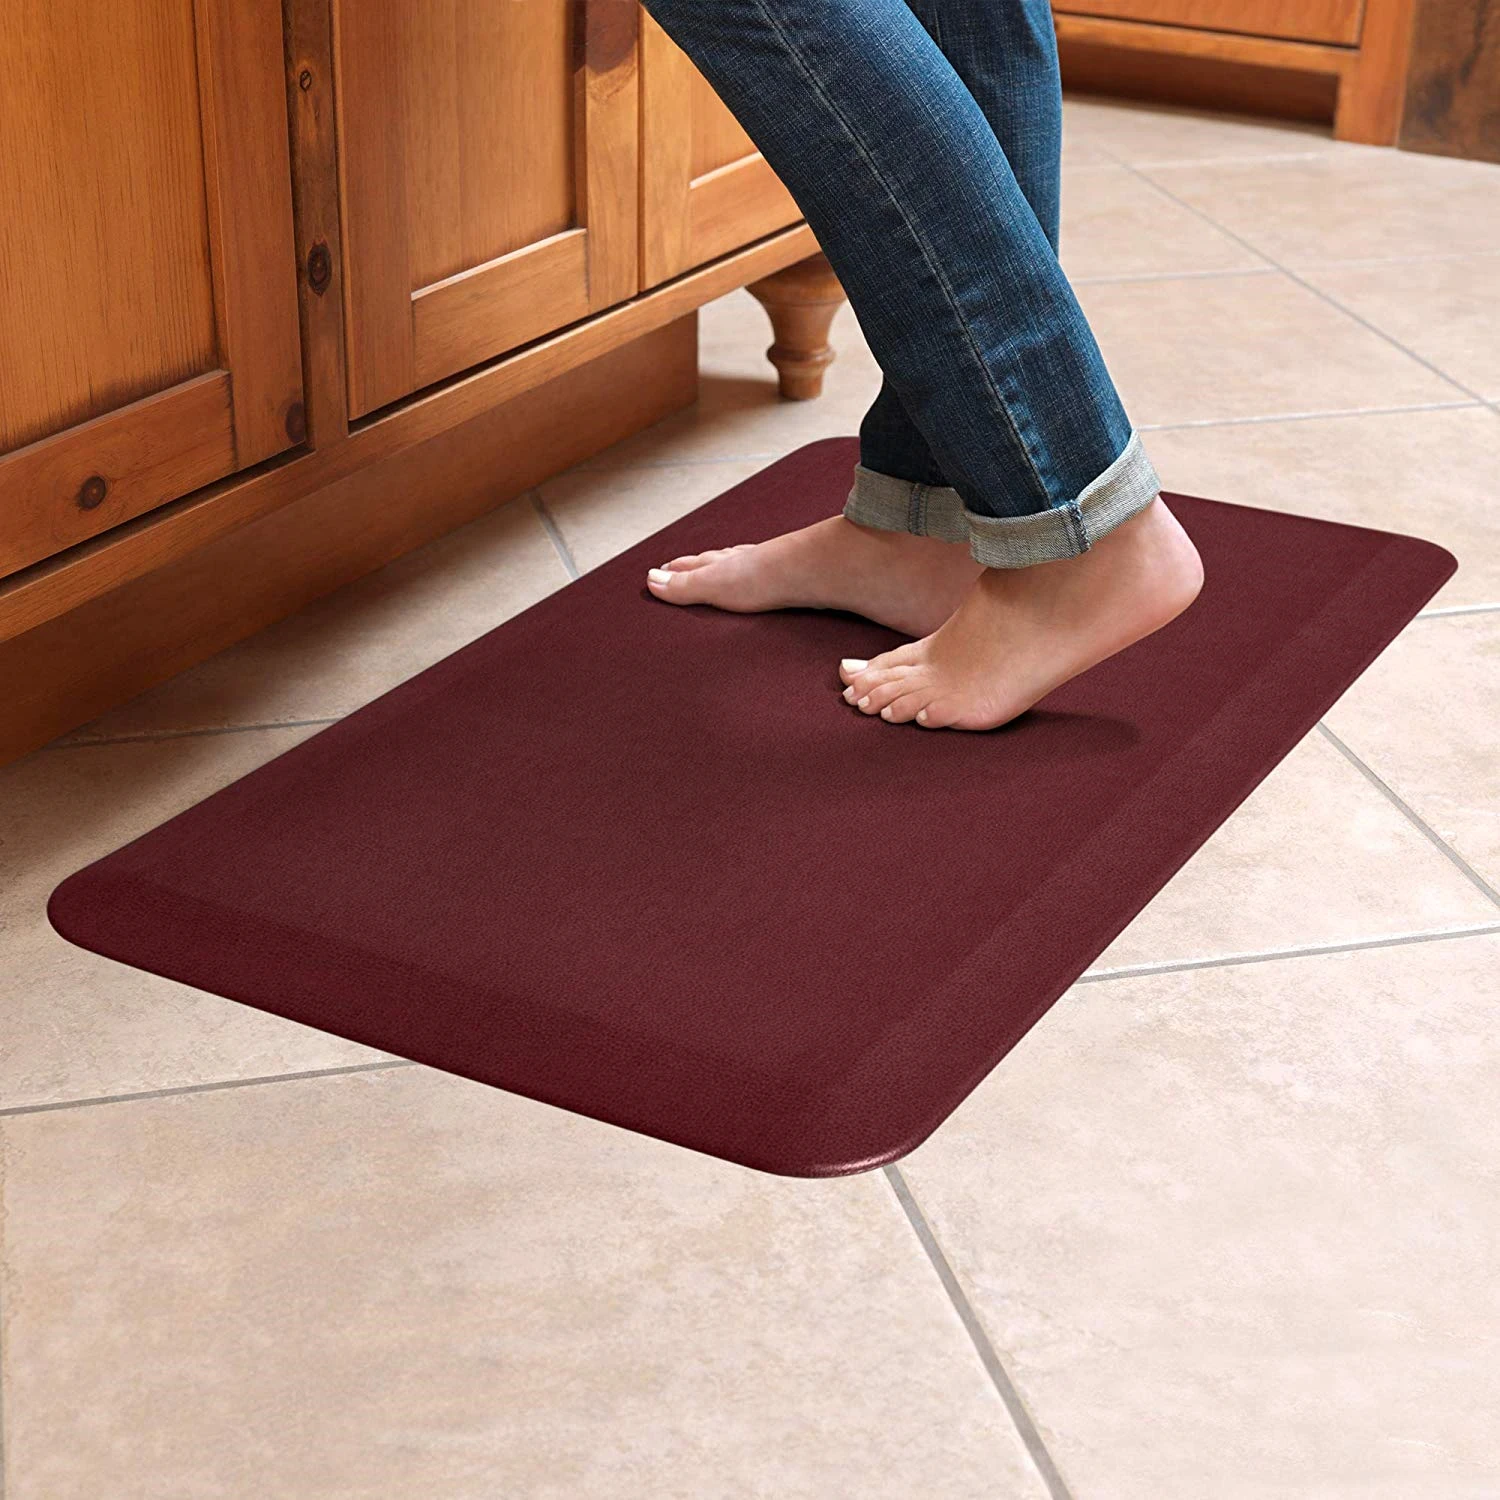  Benefits of Owning an Anti-Fatigue Mat In Your Home 